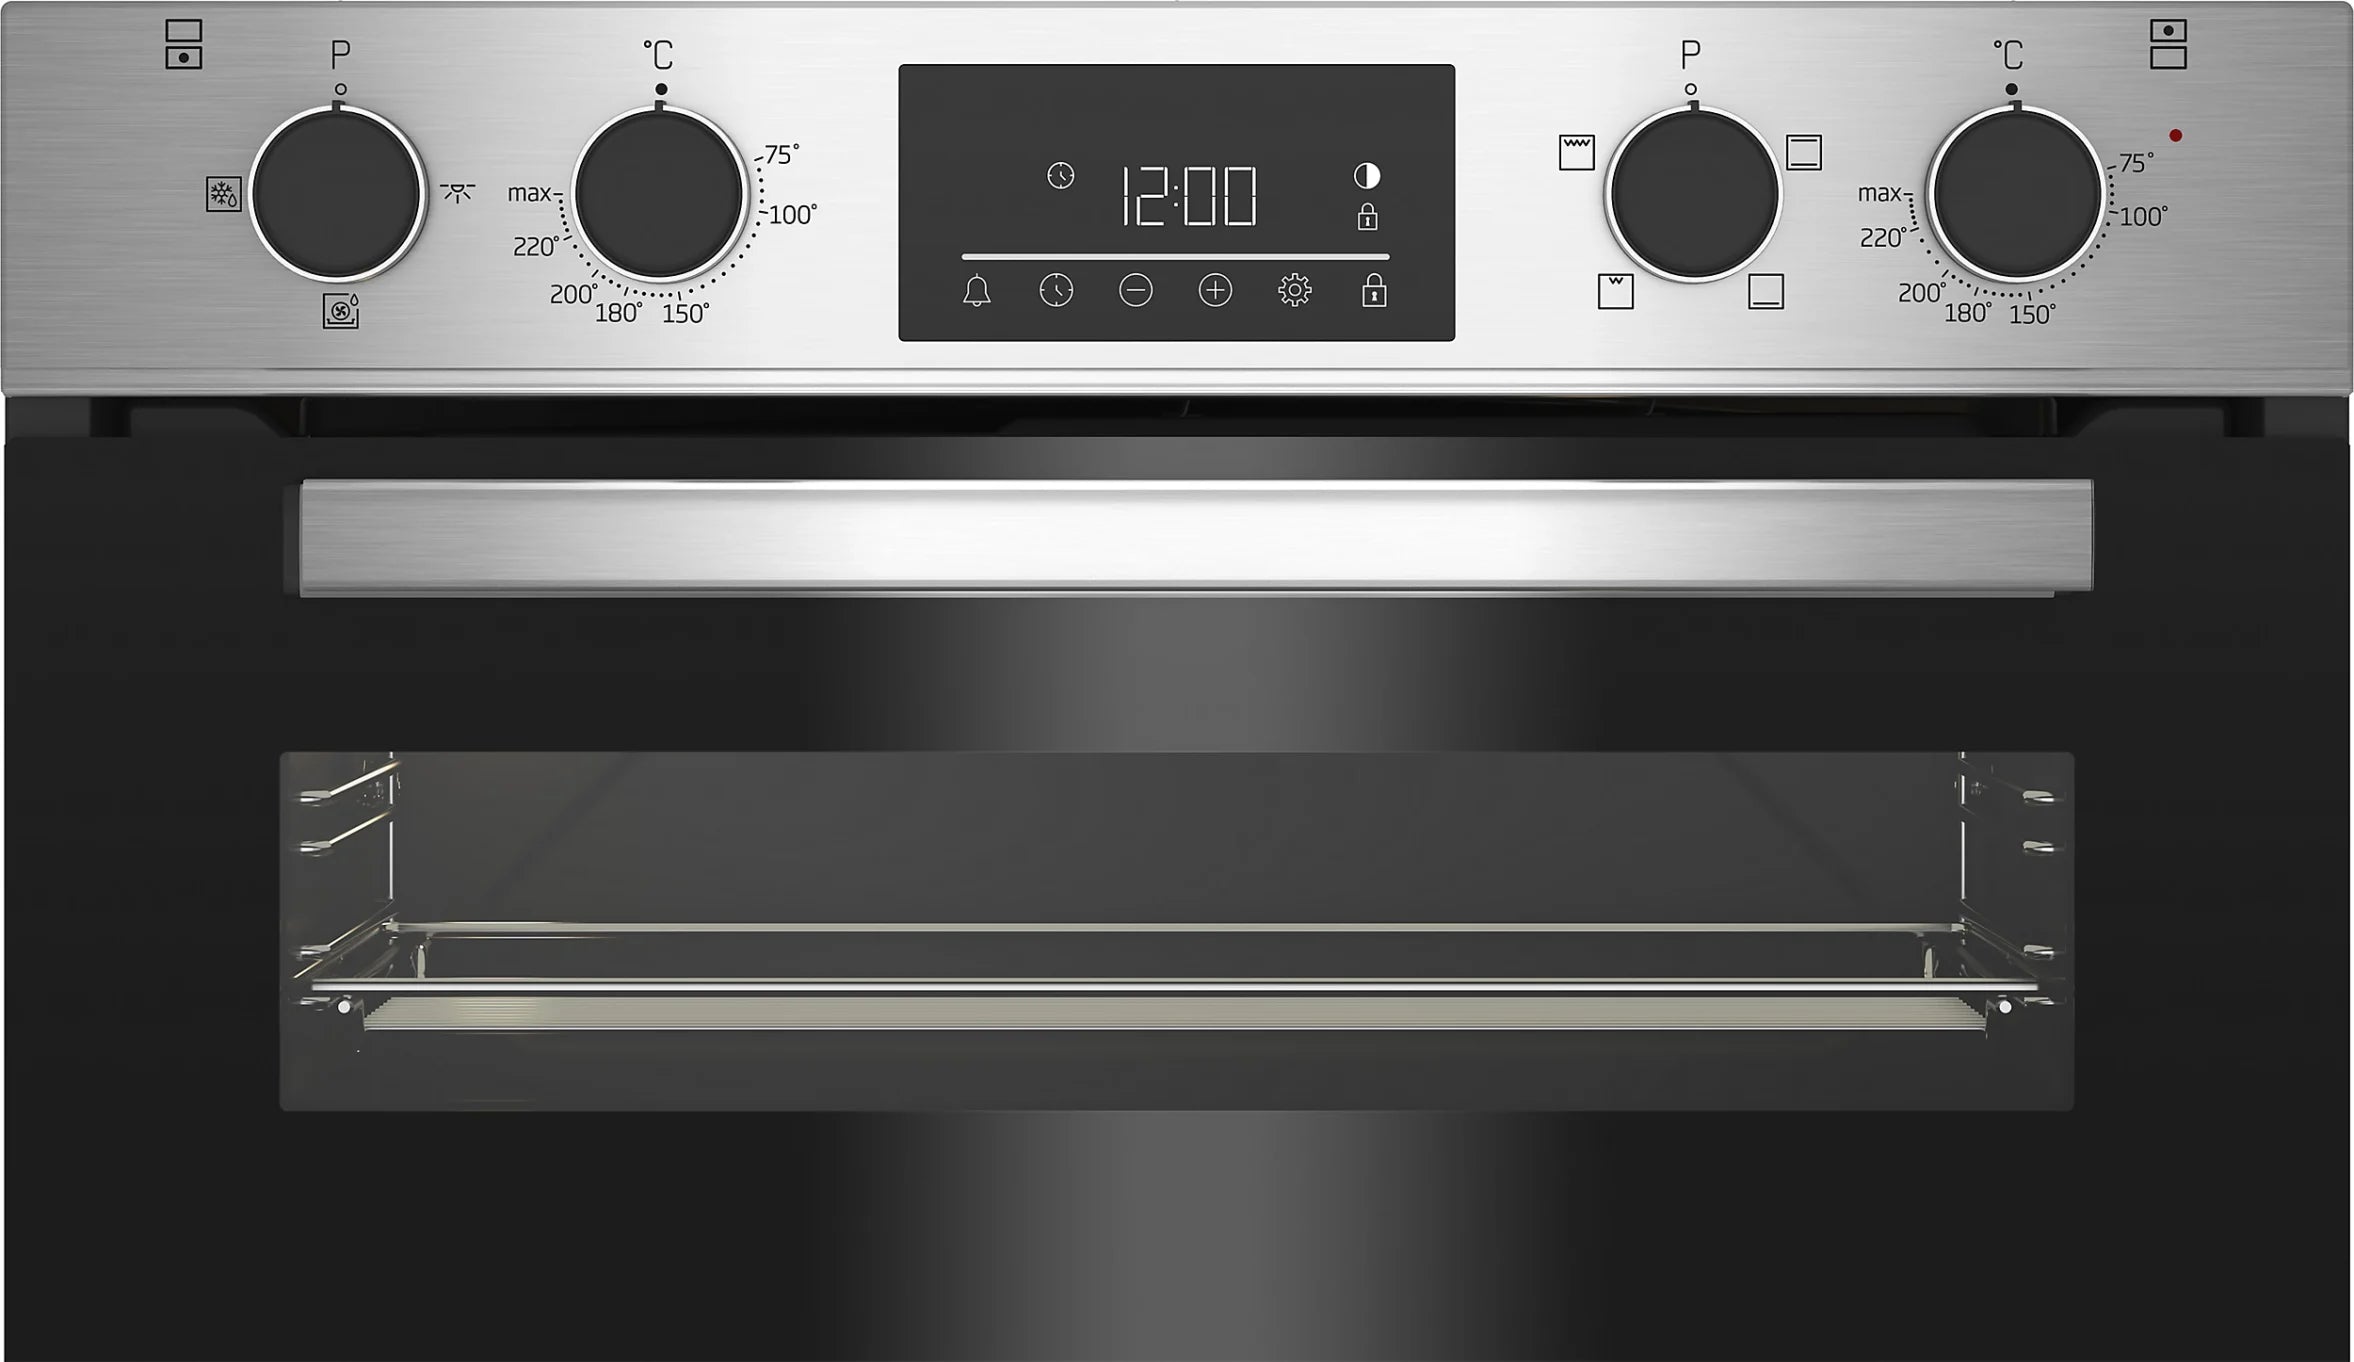 Beko-Double Oven-Stainless Steel-Built in-Back-BBDQF22300X-X-Display 0096